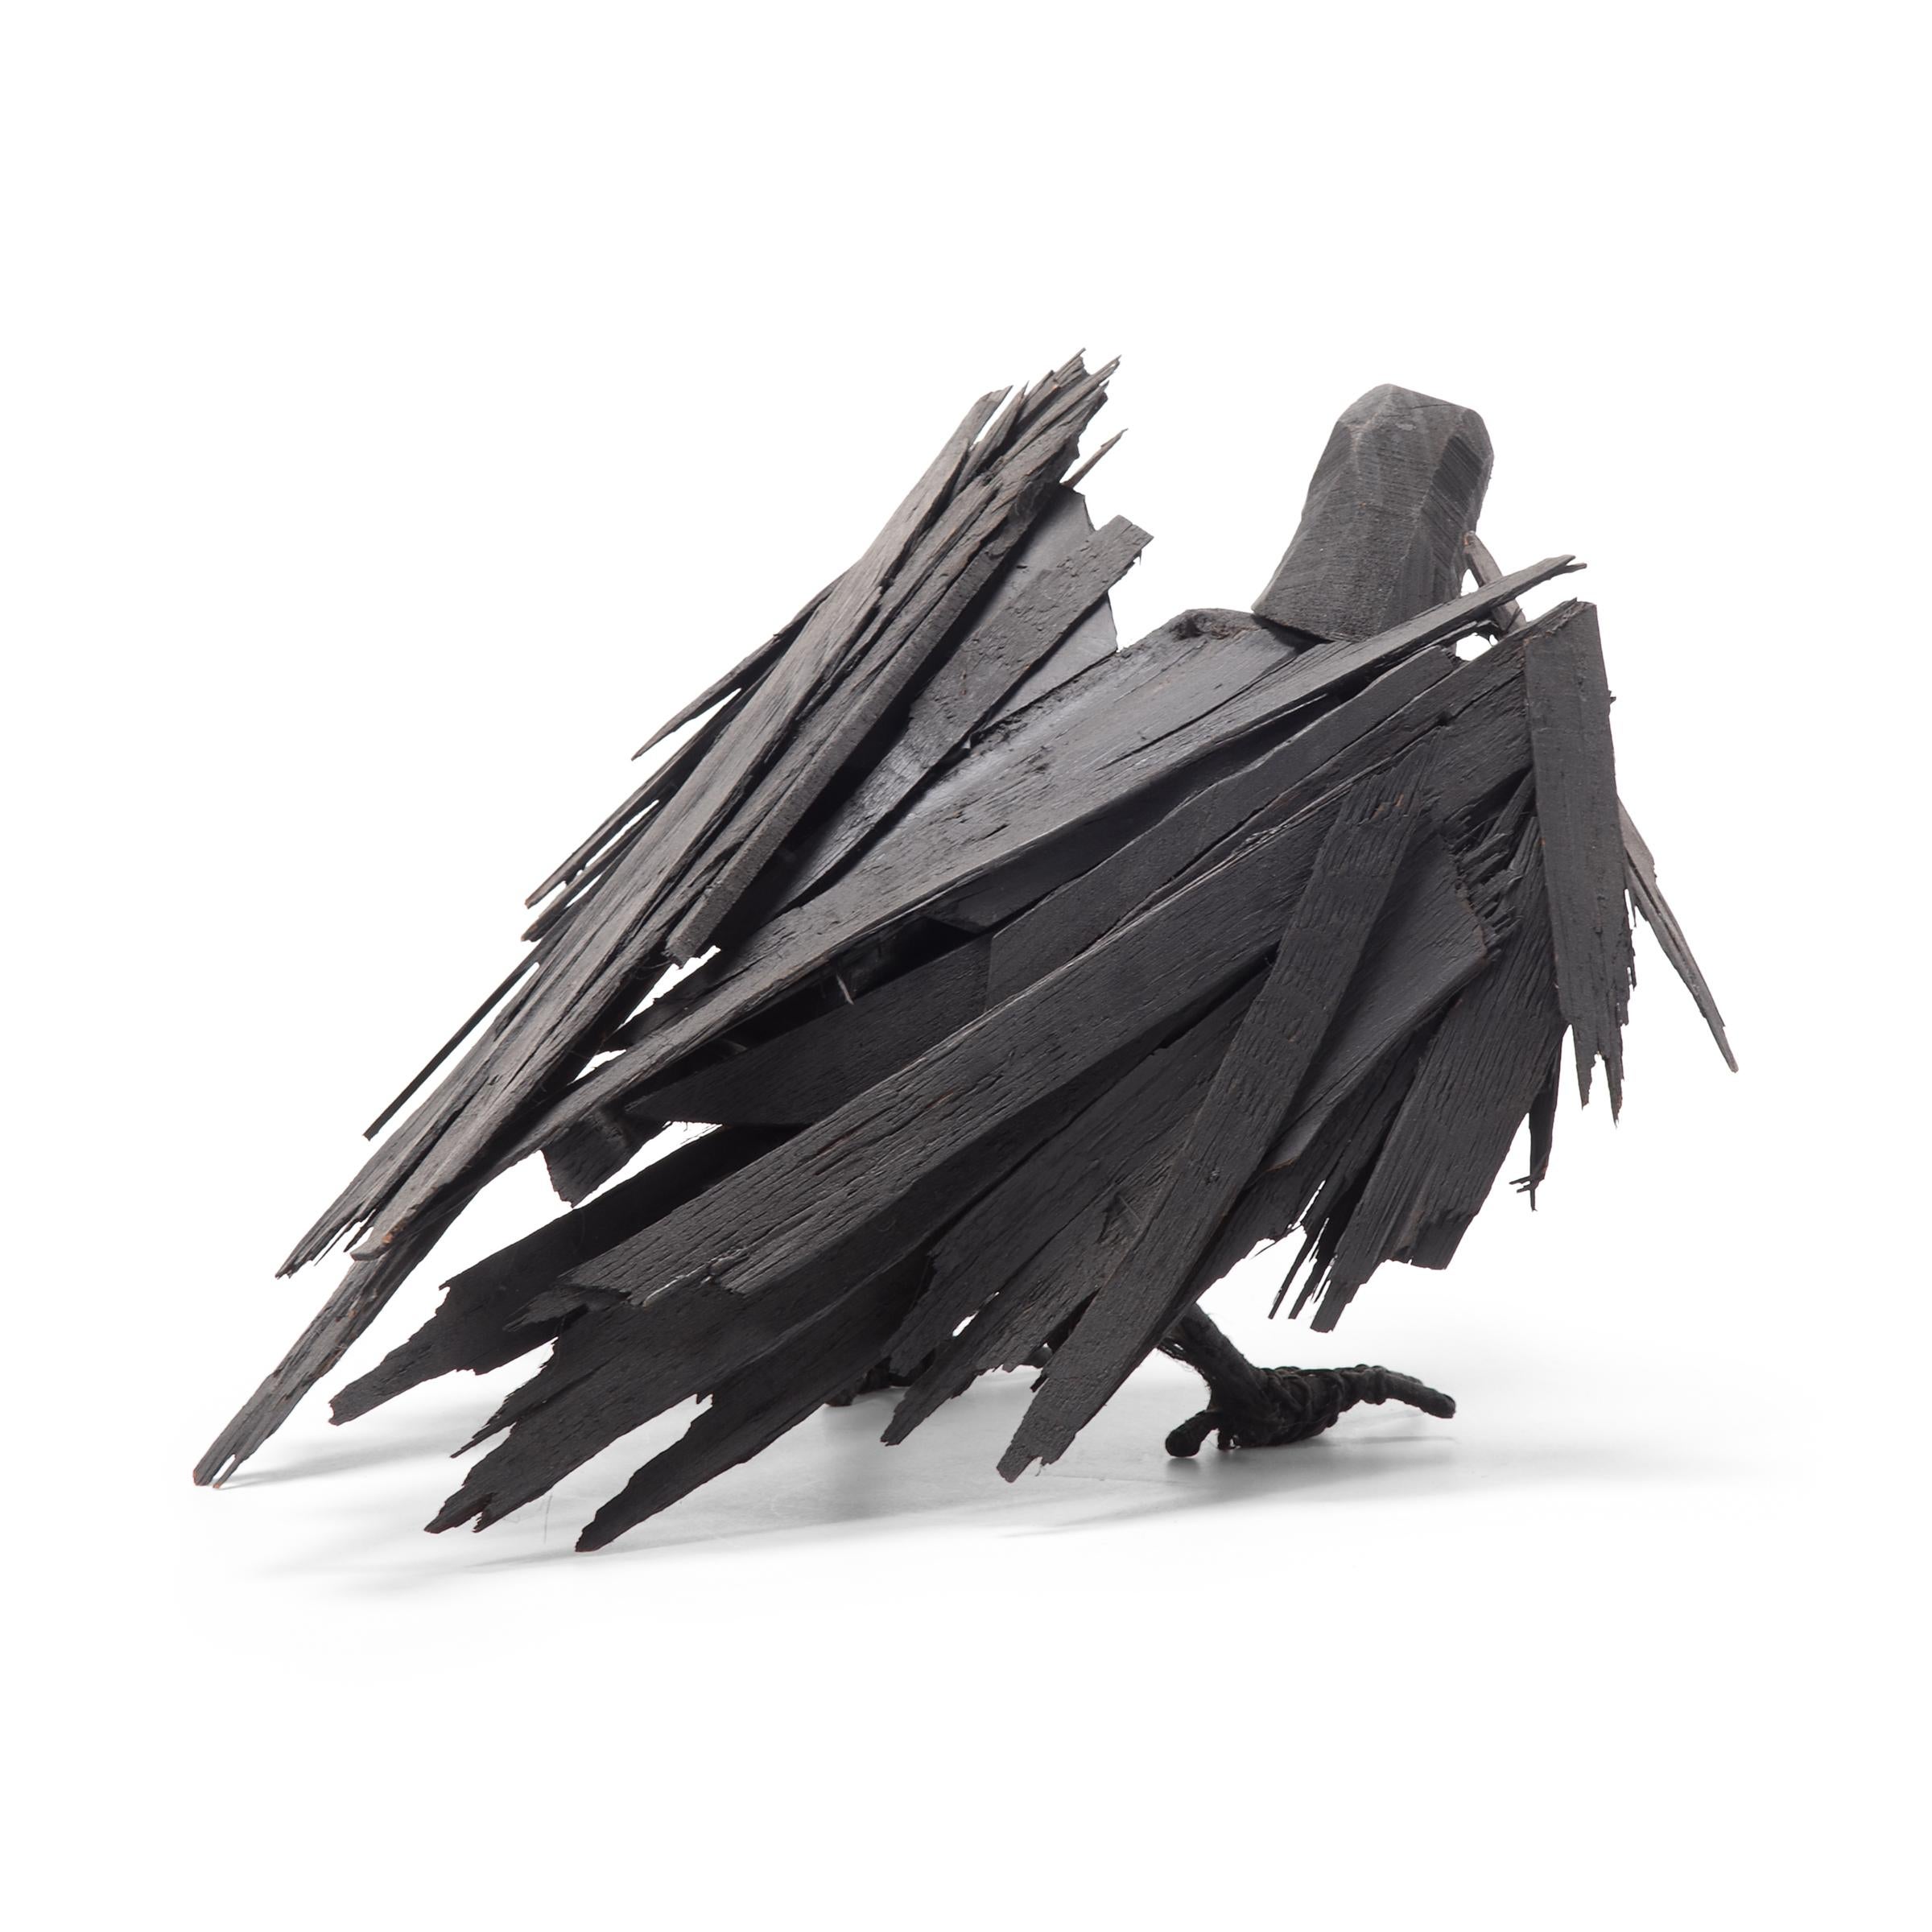 Richly textured with whimsical appeal, this late 20th century wooden crow is a delightful example of naive American sculpture. Poised mid-caw, it is hard to tell whether this crow has just landed or is ready to burst into flight. As though life